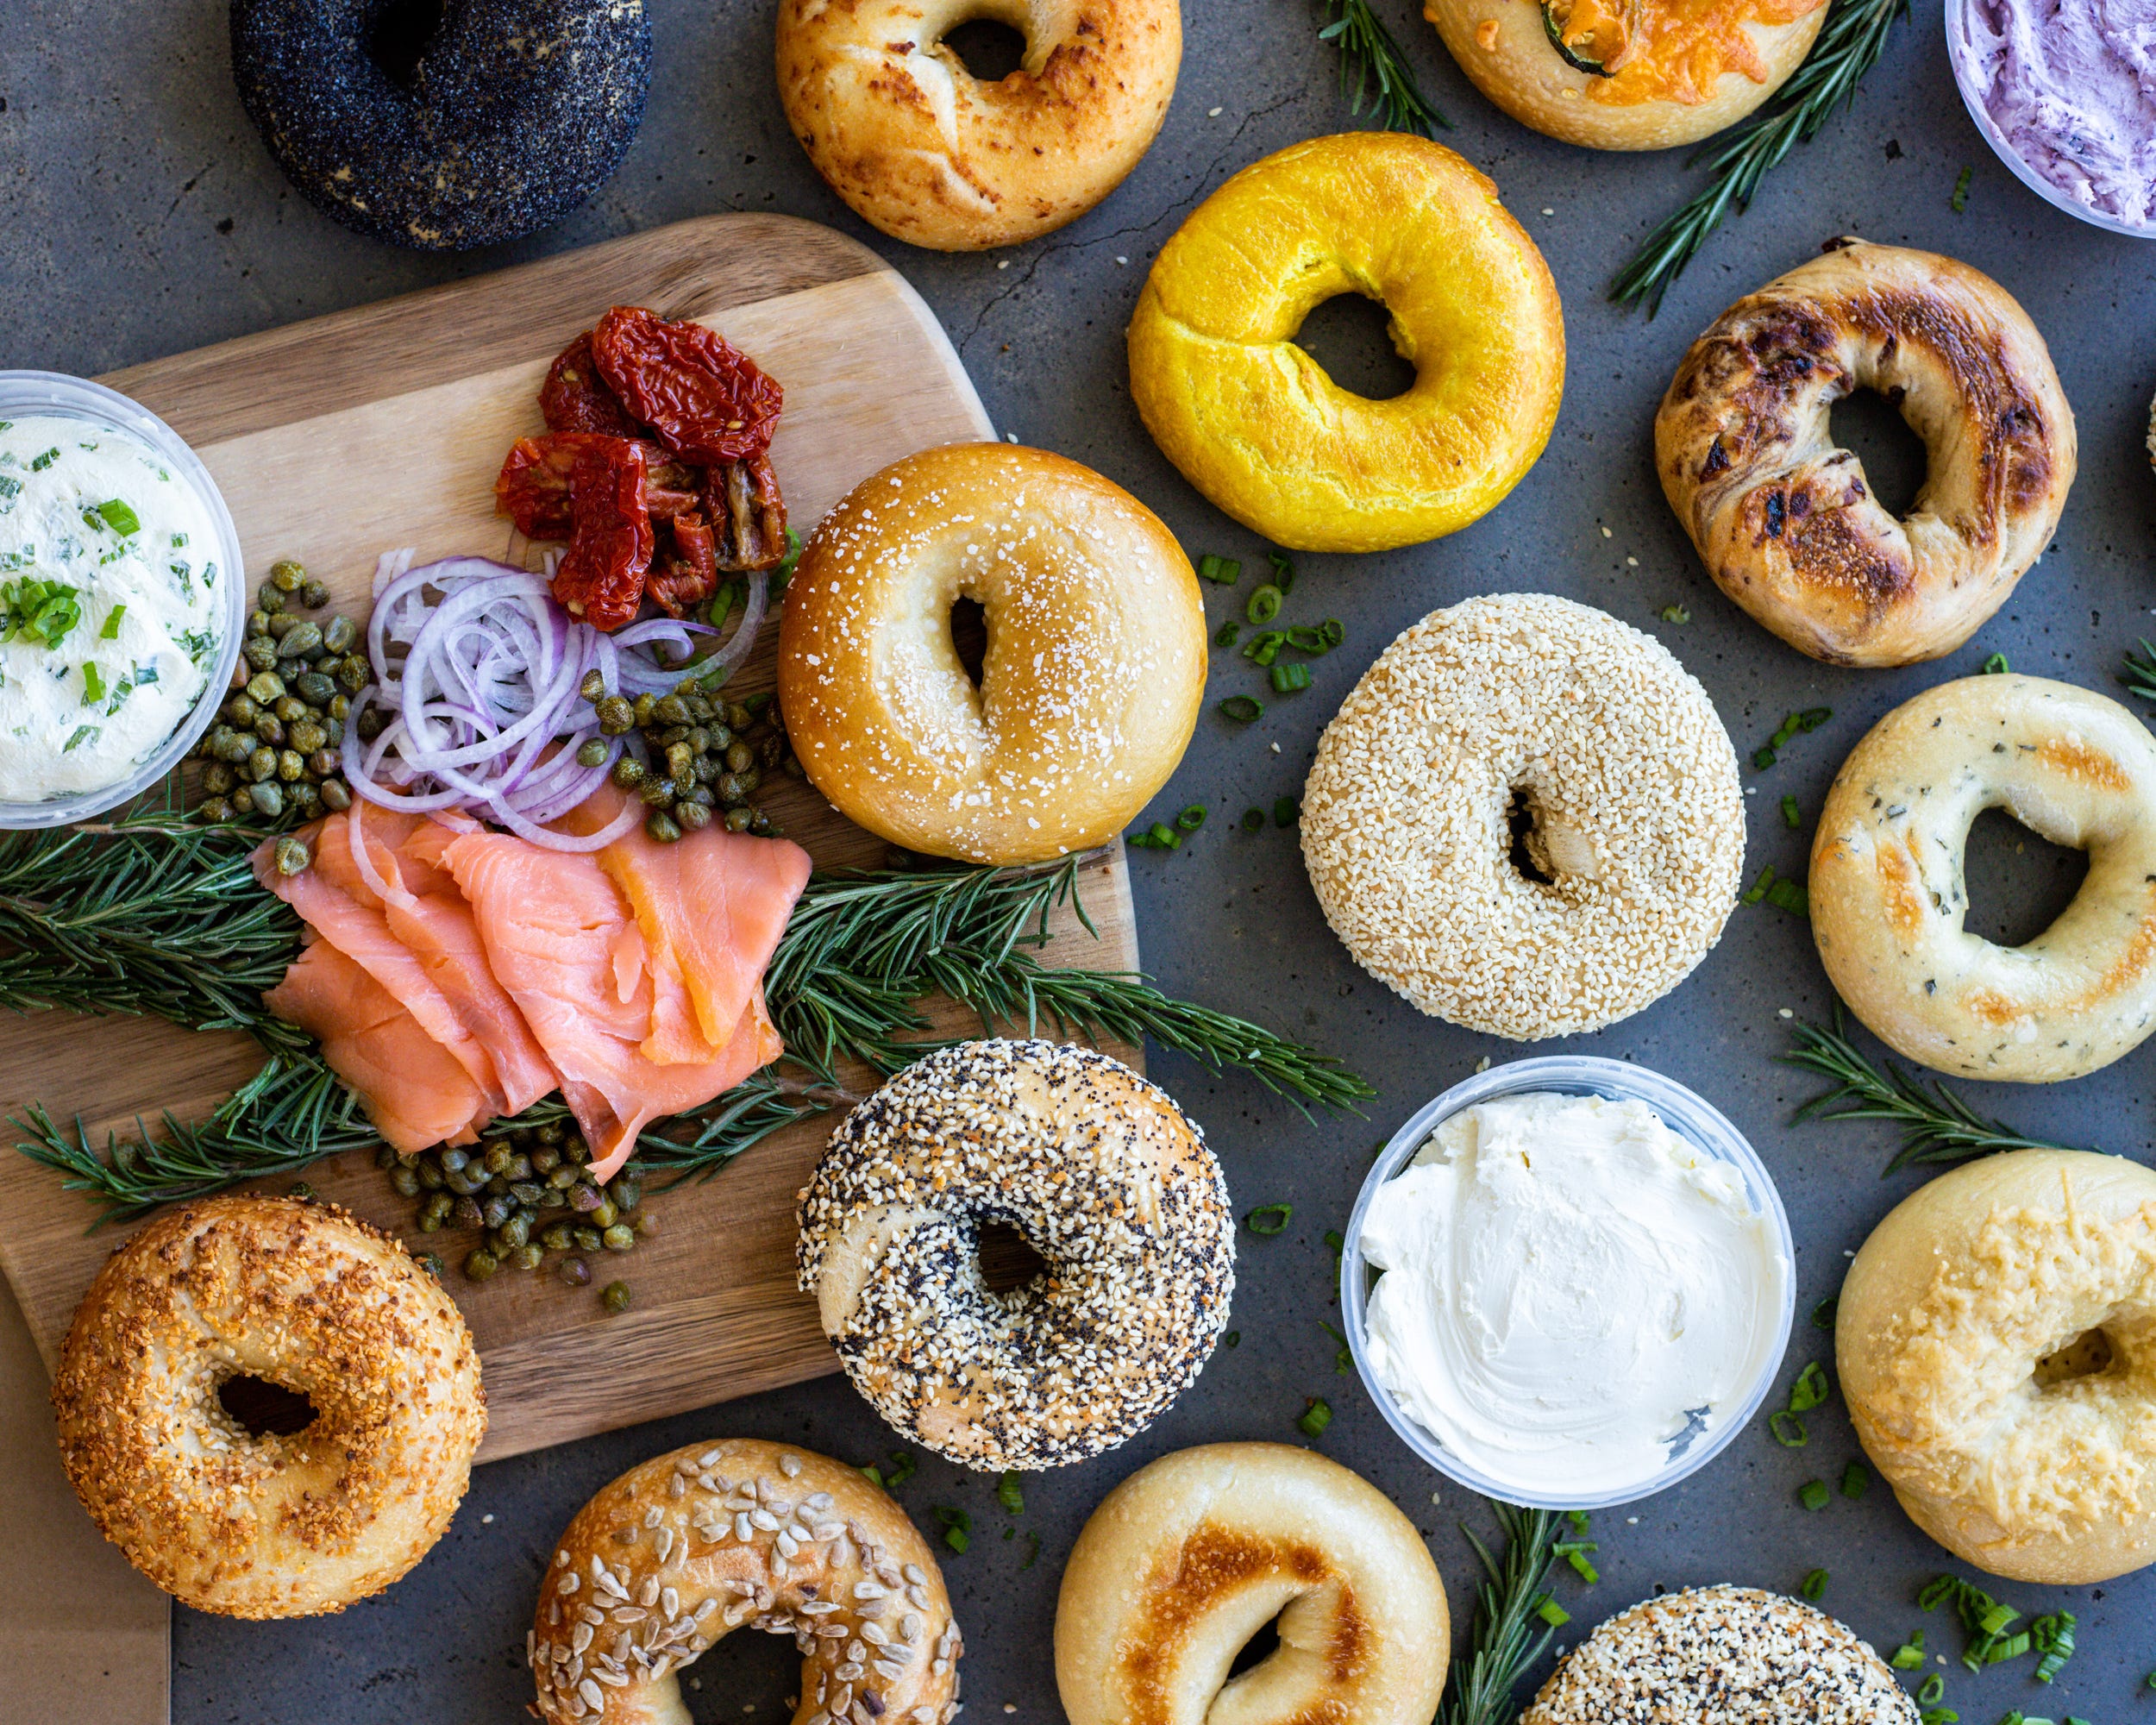 Rosen's Bagel Co. is opening in North Austin.